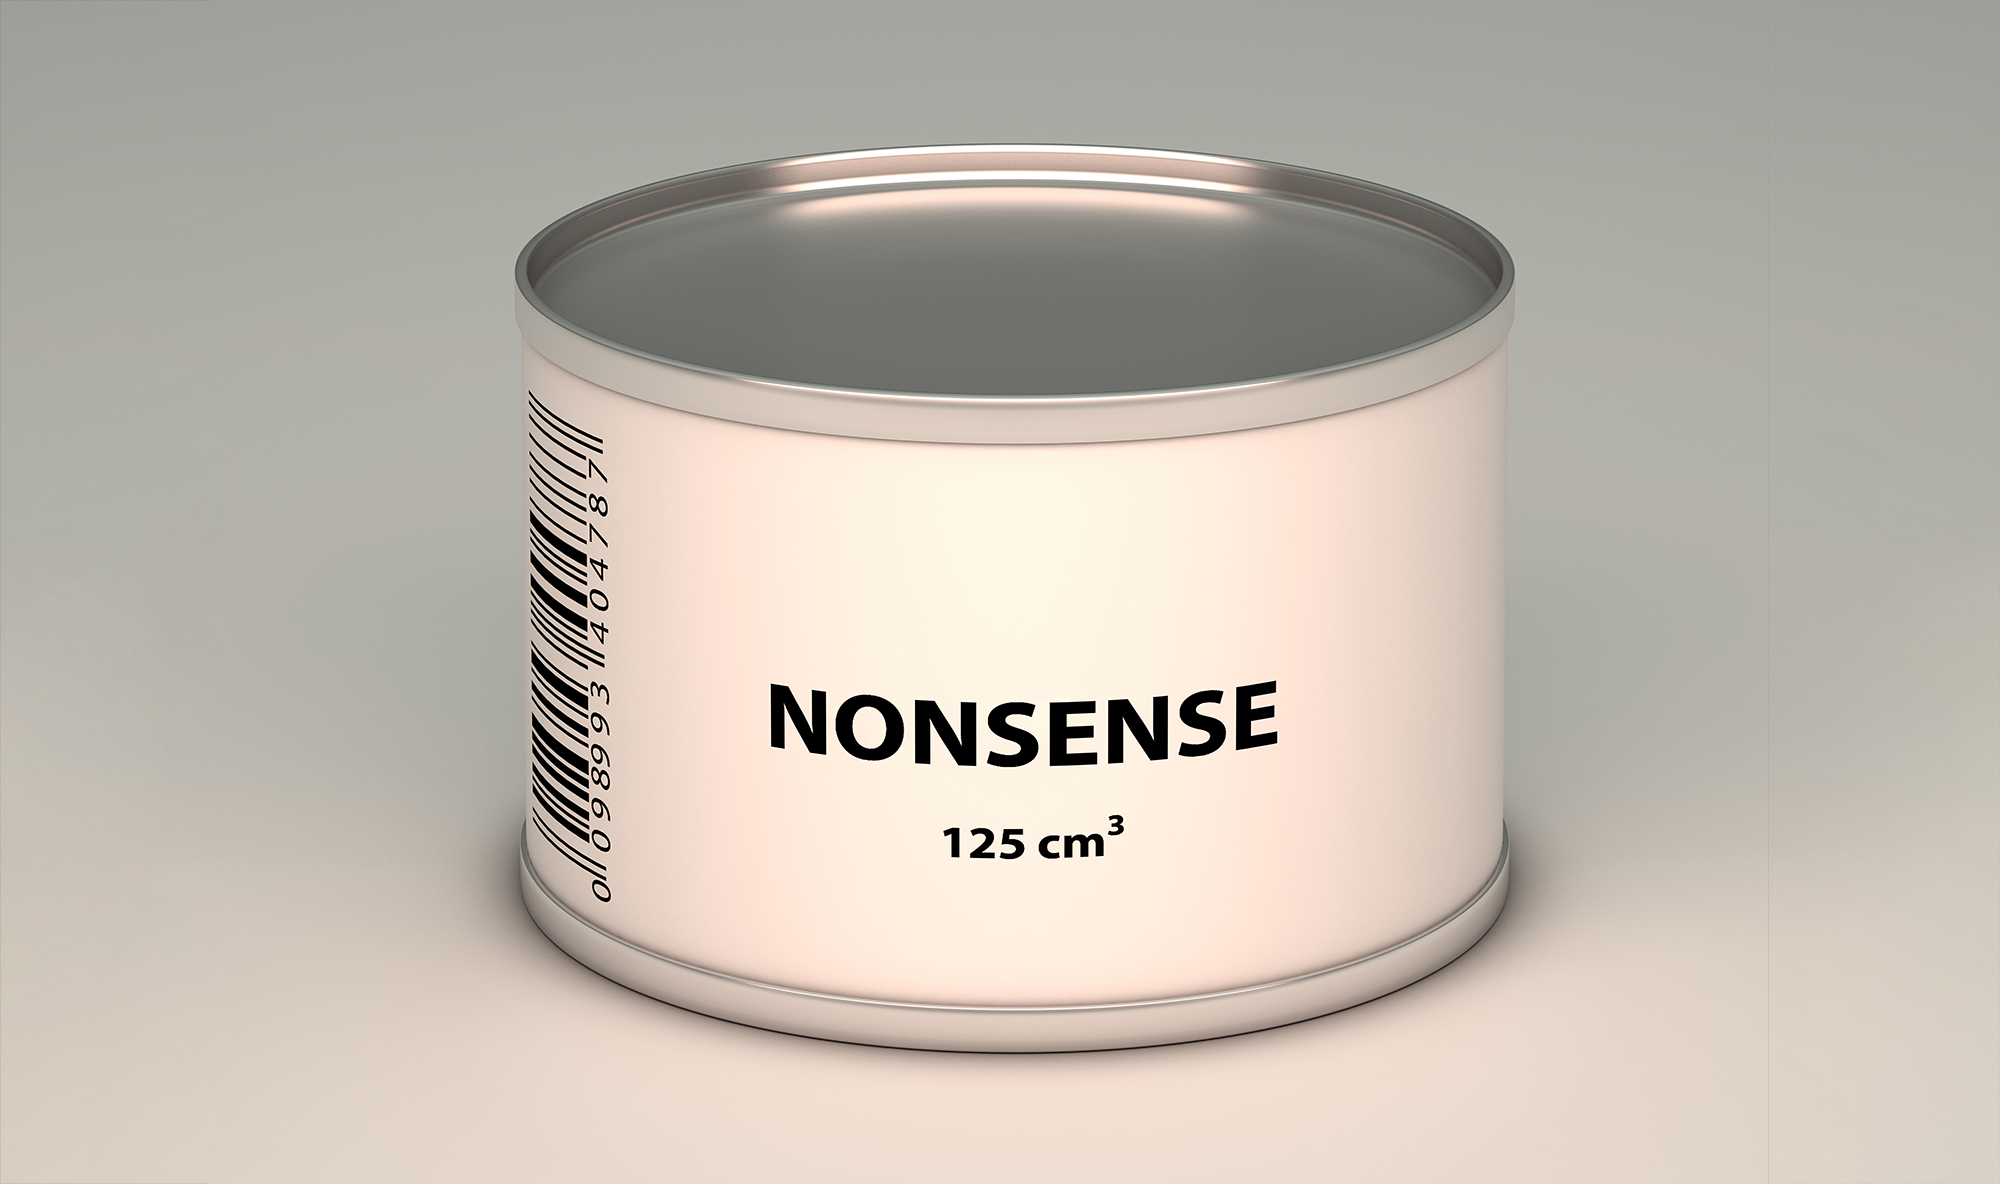 Can of Nonsense - shpock (Edited)